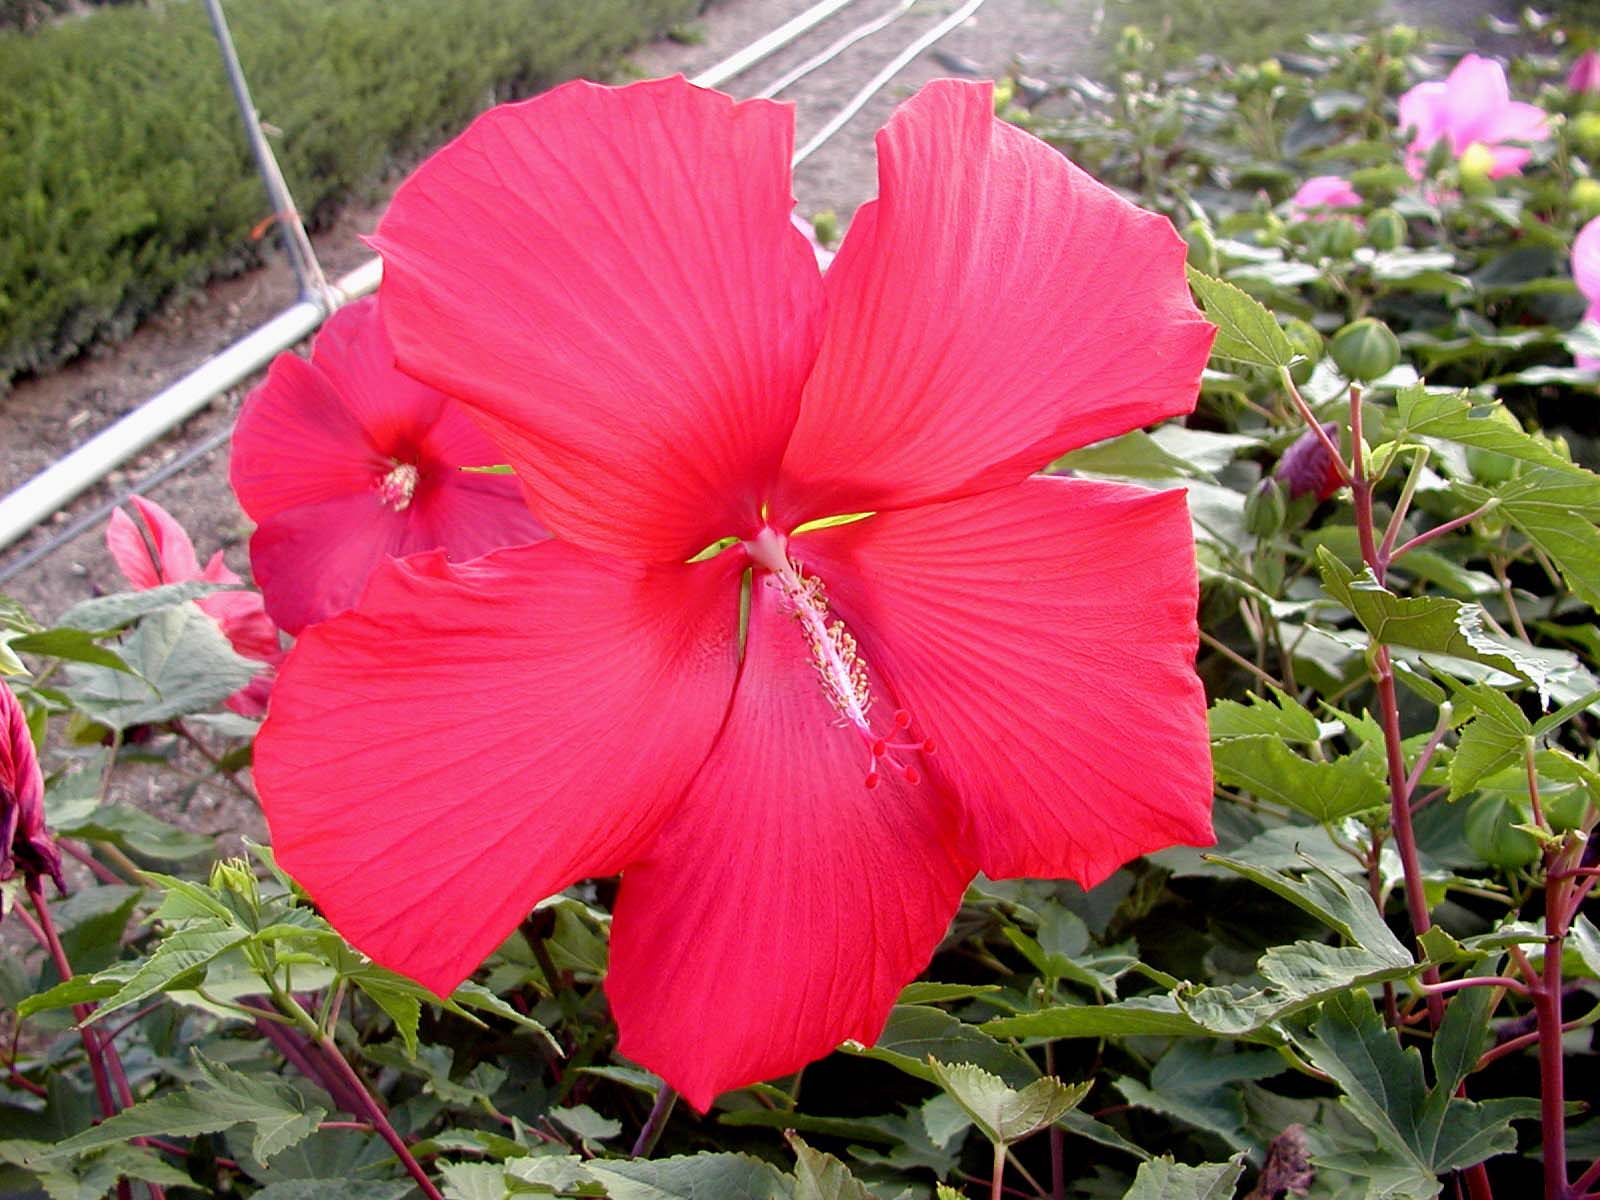 HIBISCUS moscheutos 'Lord Baltimore' - Giant Hibiscus or Rose Mallow